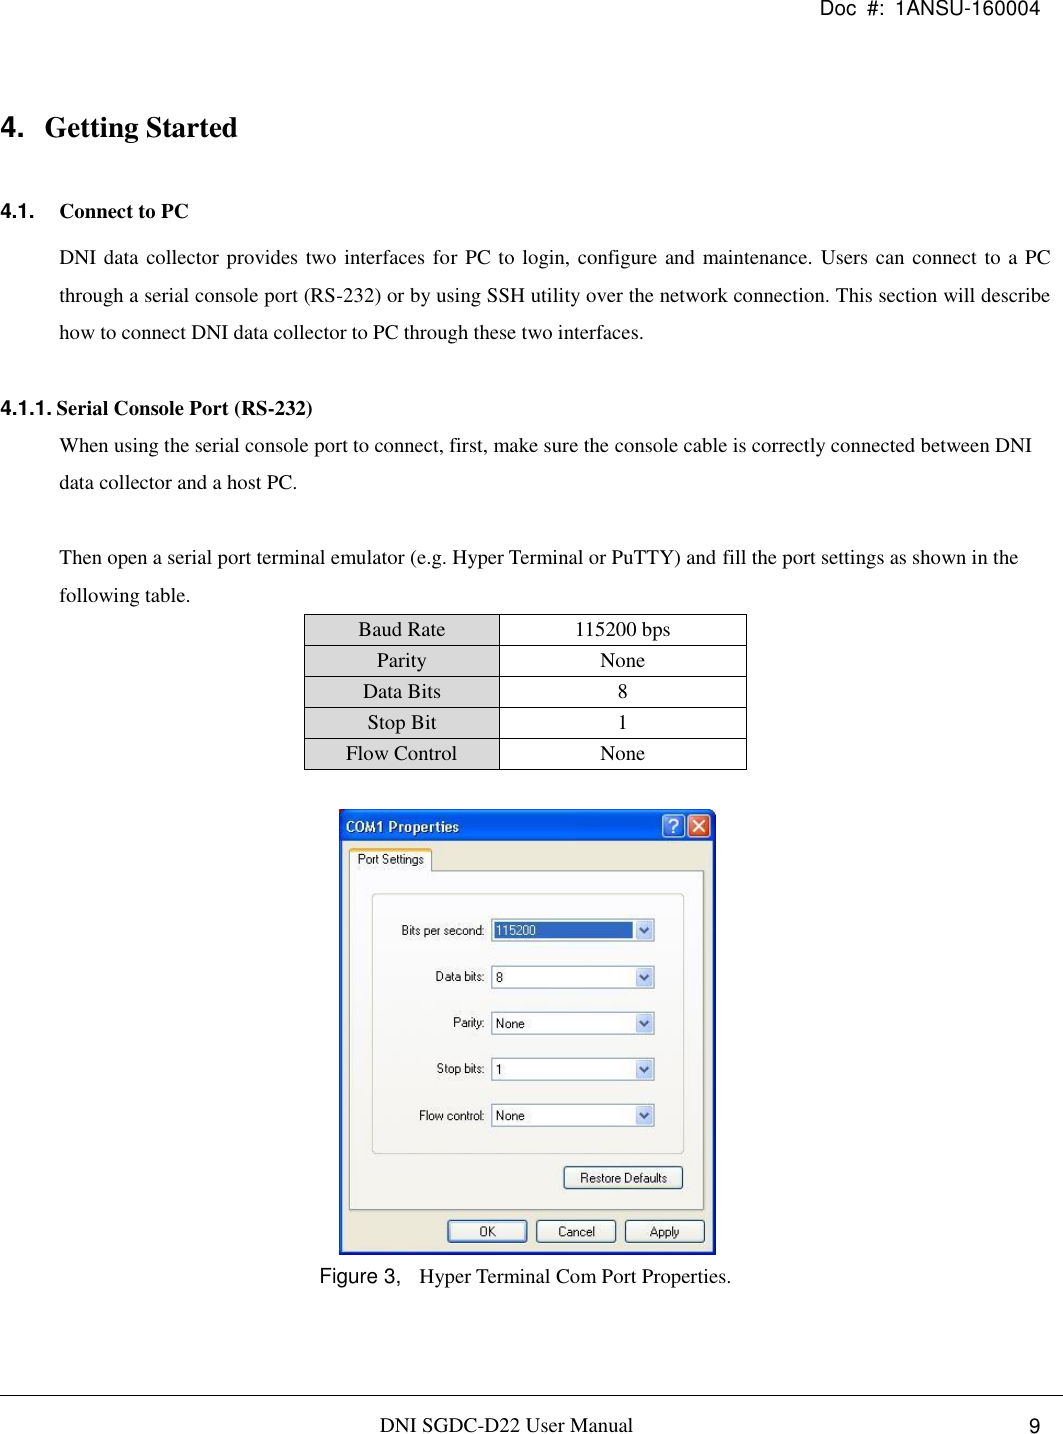 Doc  #:  1ANSU-160004   DNI SGDC-D22 User Manual i.  9 4. Getting Started 4.1. Connect to PC DNI data collector provides two interfaces for PC to login, configure and maintenance. Users can connect to a PC through a serial console port (RS-232) or by using SSH utility over the network connection. This section will describe how to connect DNI data collector to PC through these two interfaces.  4.1.1. Serial Console Port (RS-232) When using the serial console port to connect, first, make sure the console cable is correctly connected between DNI data collector and a host PC.  Then open a serial port terminal emulator (e.g. Hyper Terminal or PuTTY) and fill the port settings as shown in the following table. Baud Rate 115200 bps Parity None Data Bits 8 Stop Bit 1 Flow Control None   Figure 3,  Hyper Terminal Com Port Properties. 